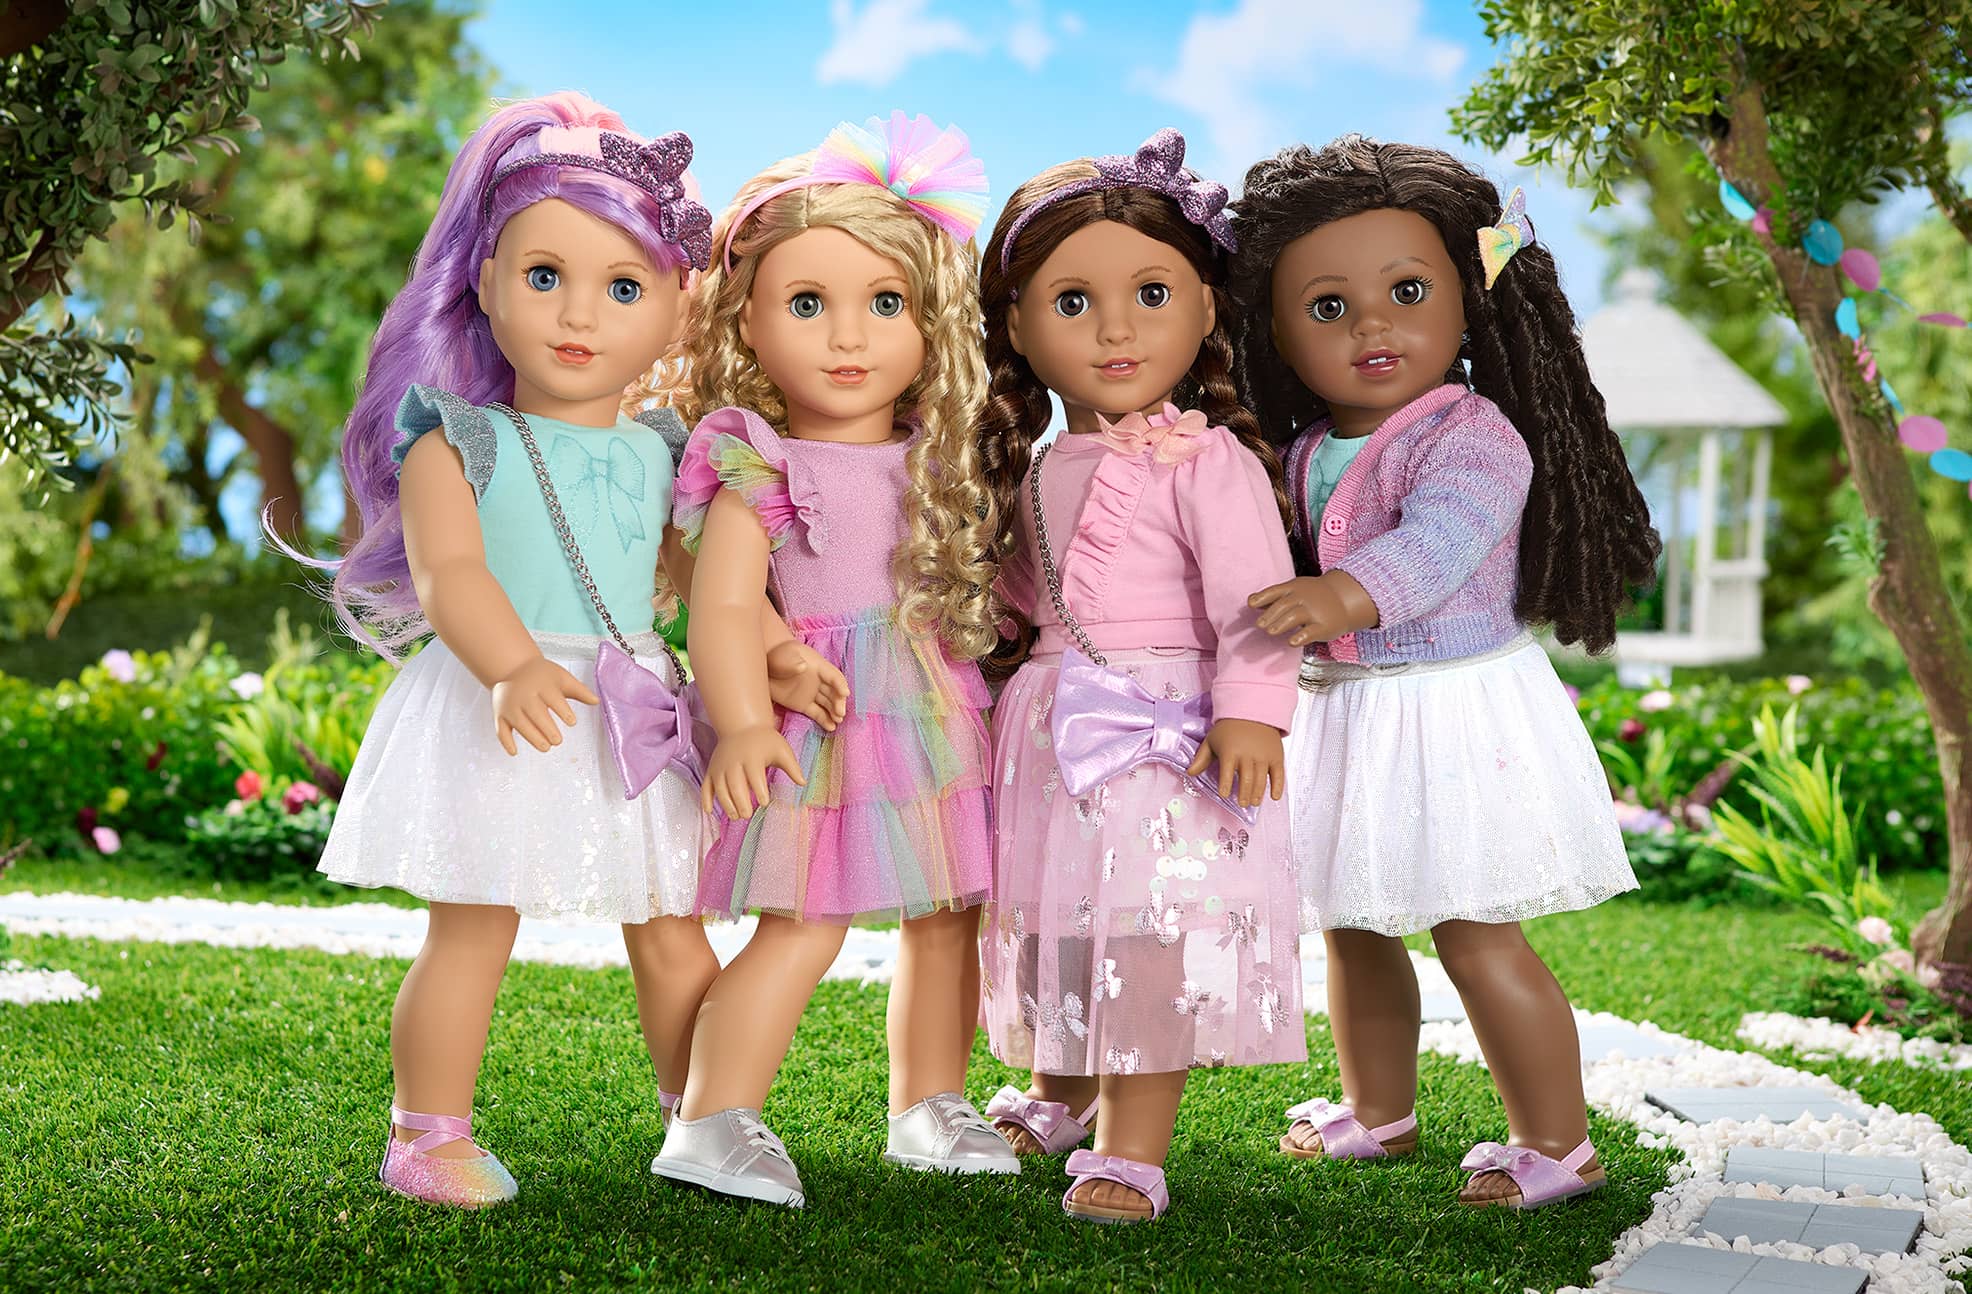 Four Truly Me dolls standing while wearing spring dresses